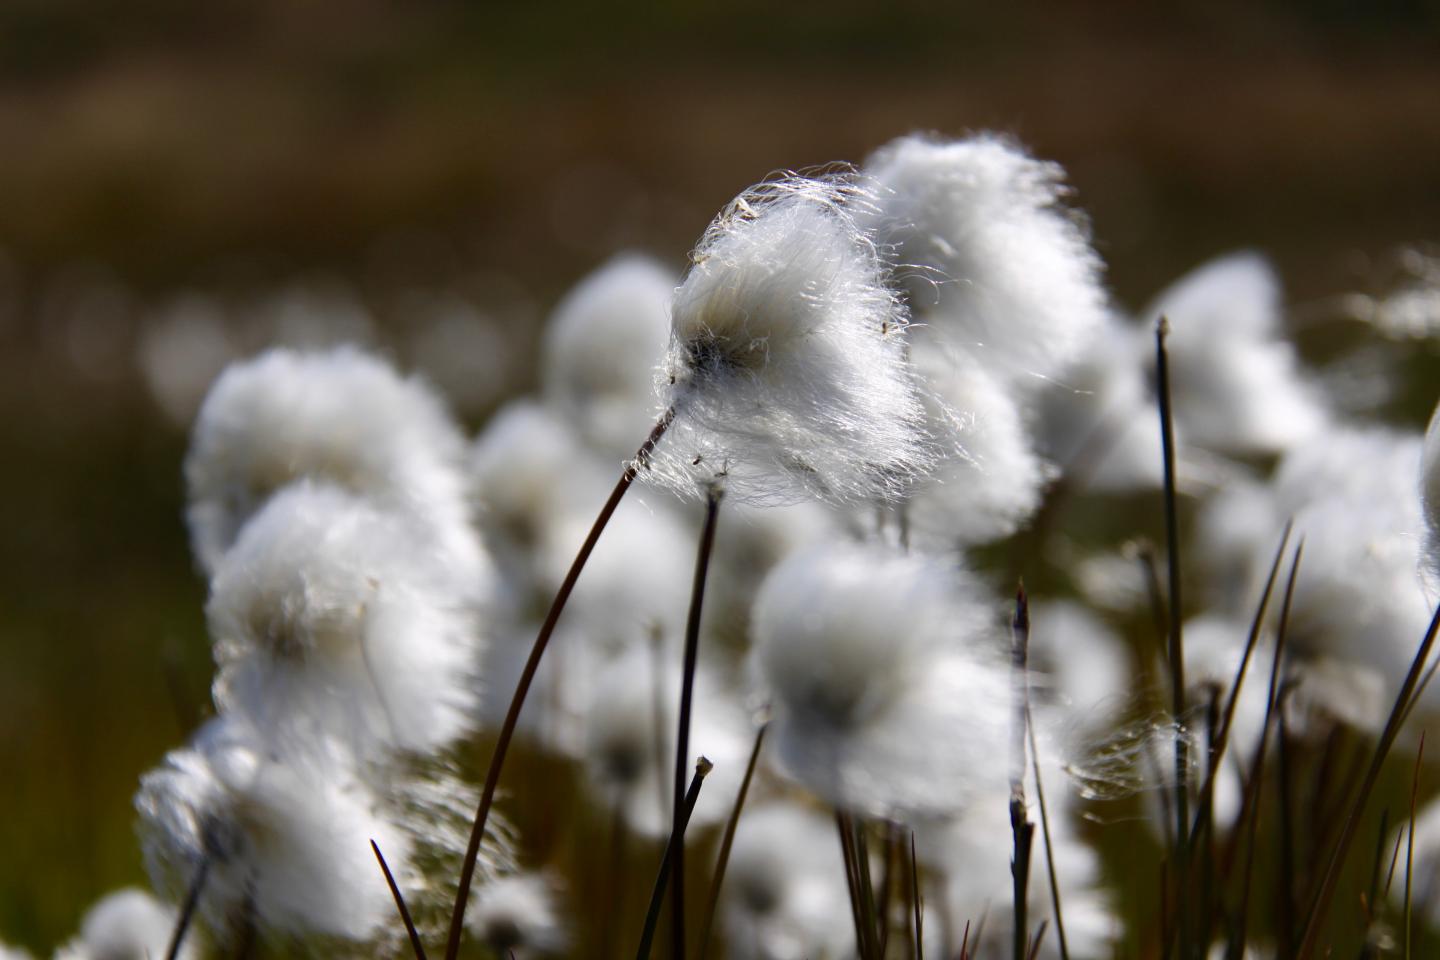 Cottongrass in Greenland